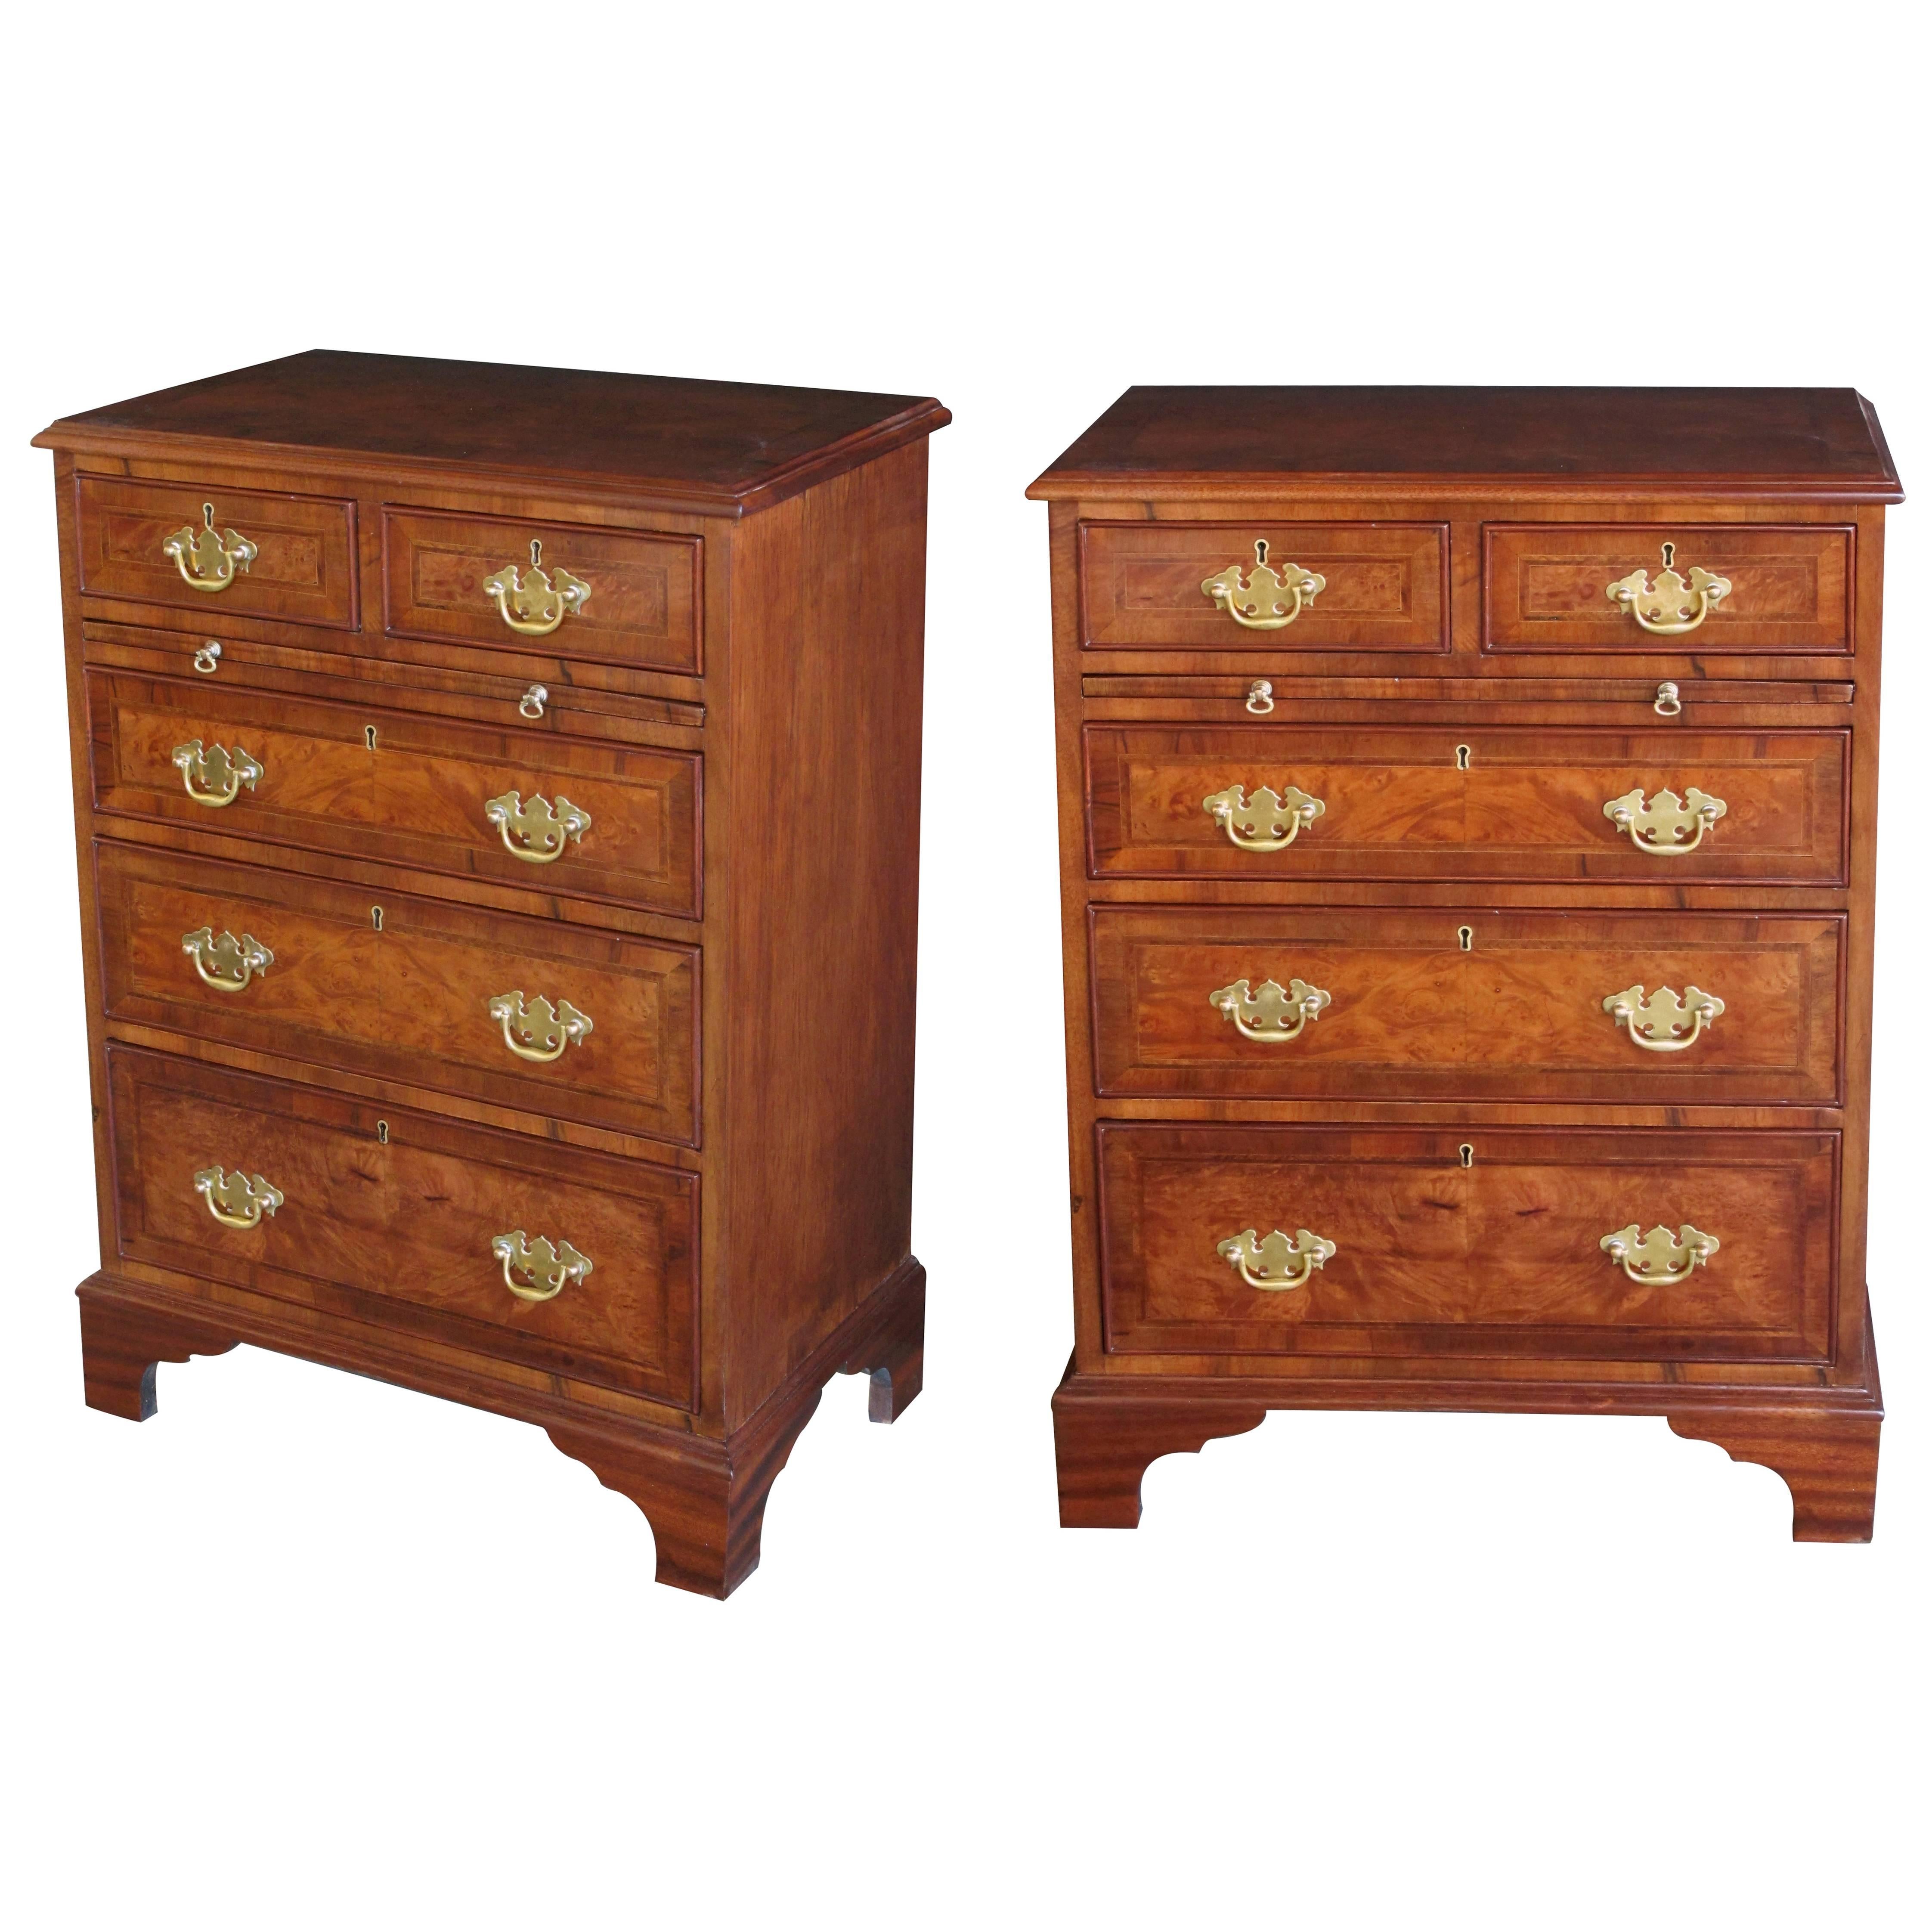 Good Quality Pair of English George II Style Burl Walnut Bedside Chests